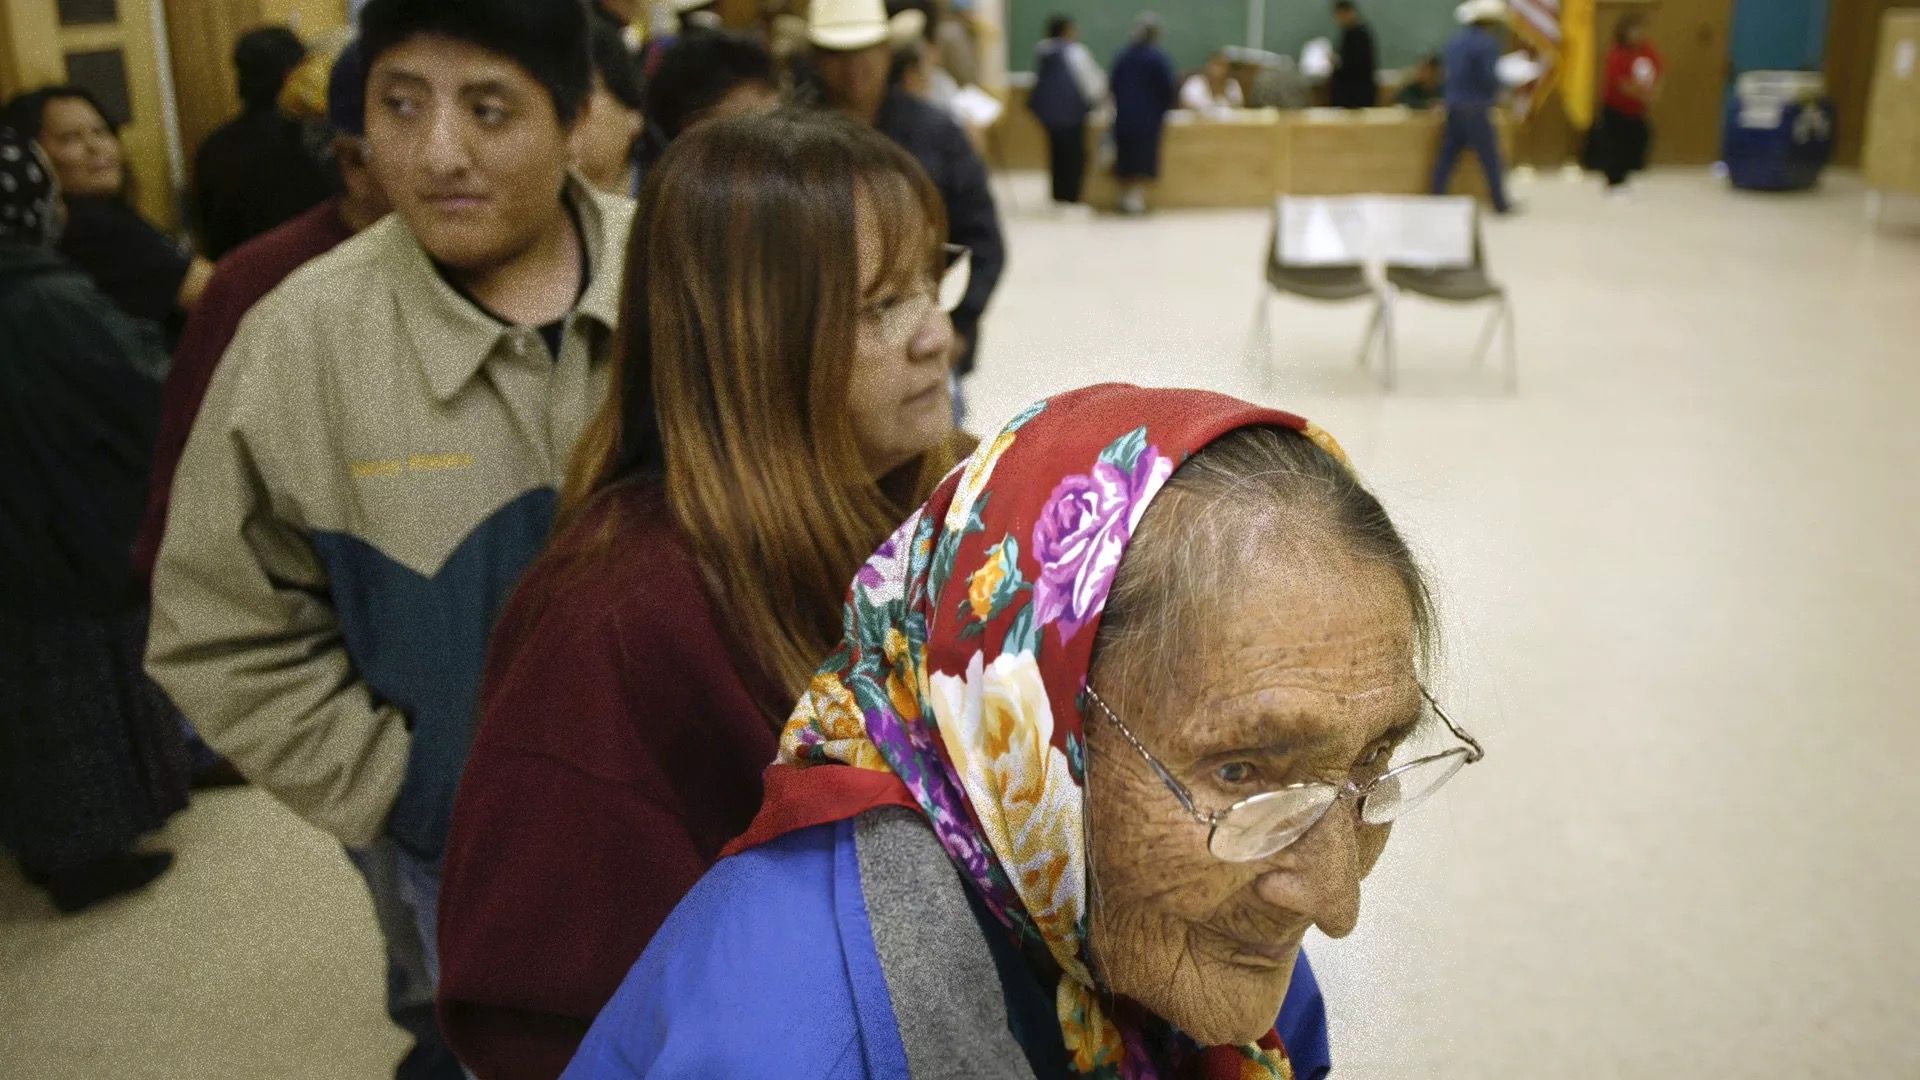 Native American voters are seen lining up to cast ballots.